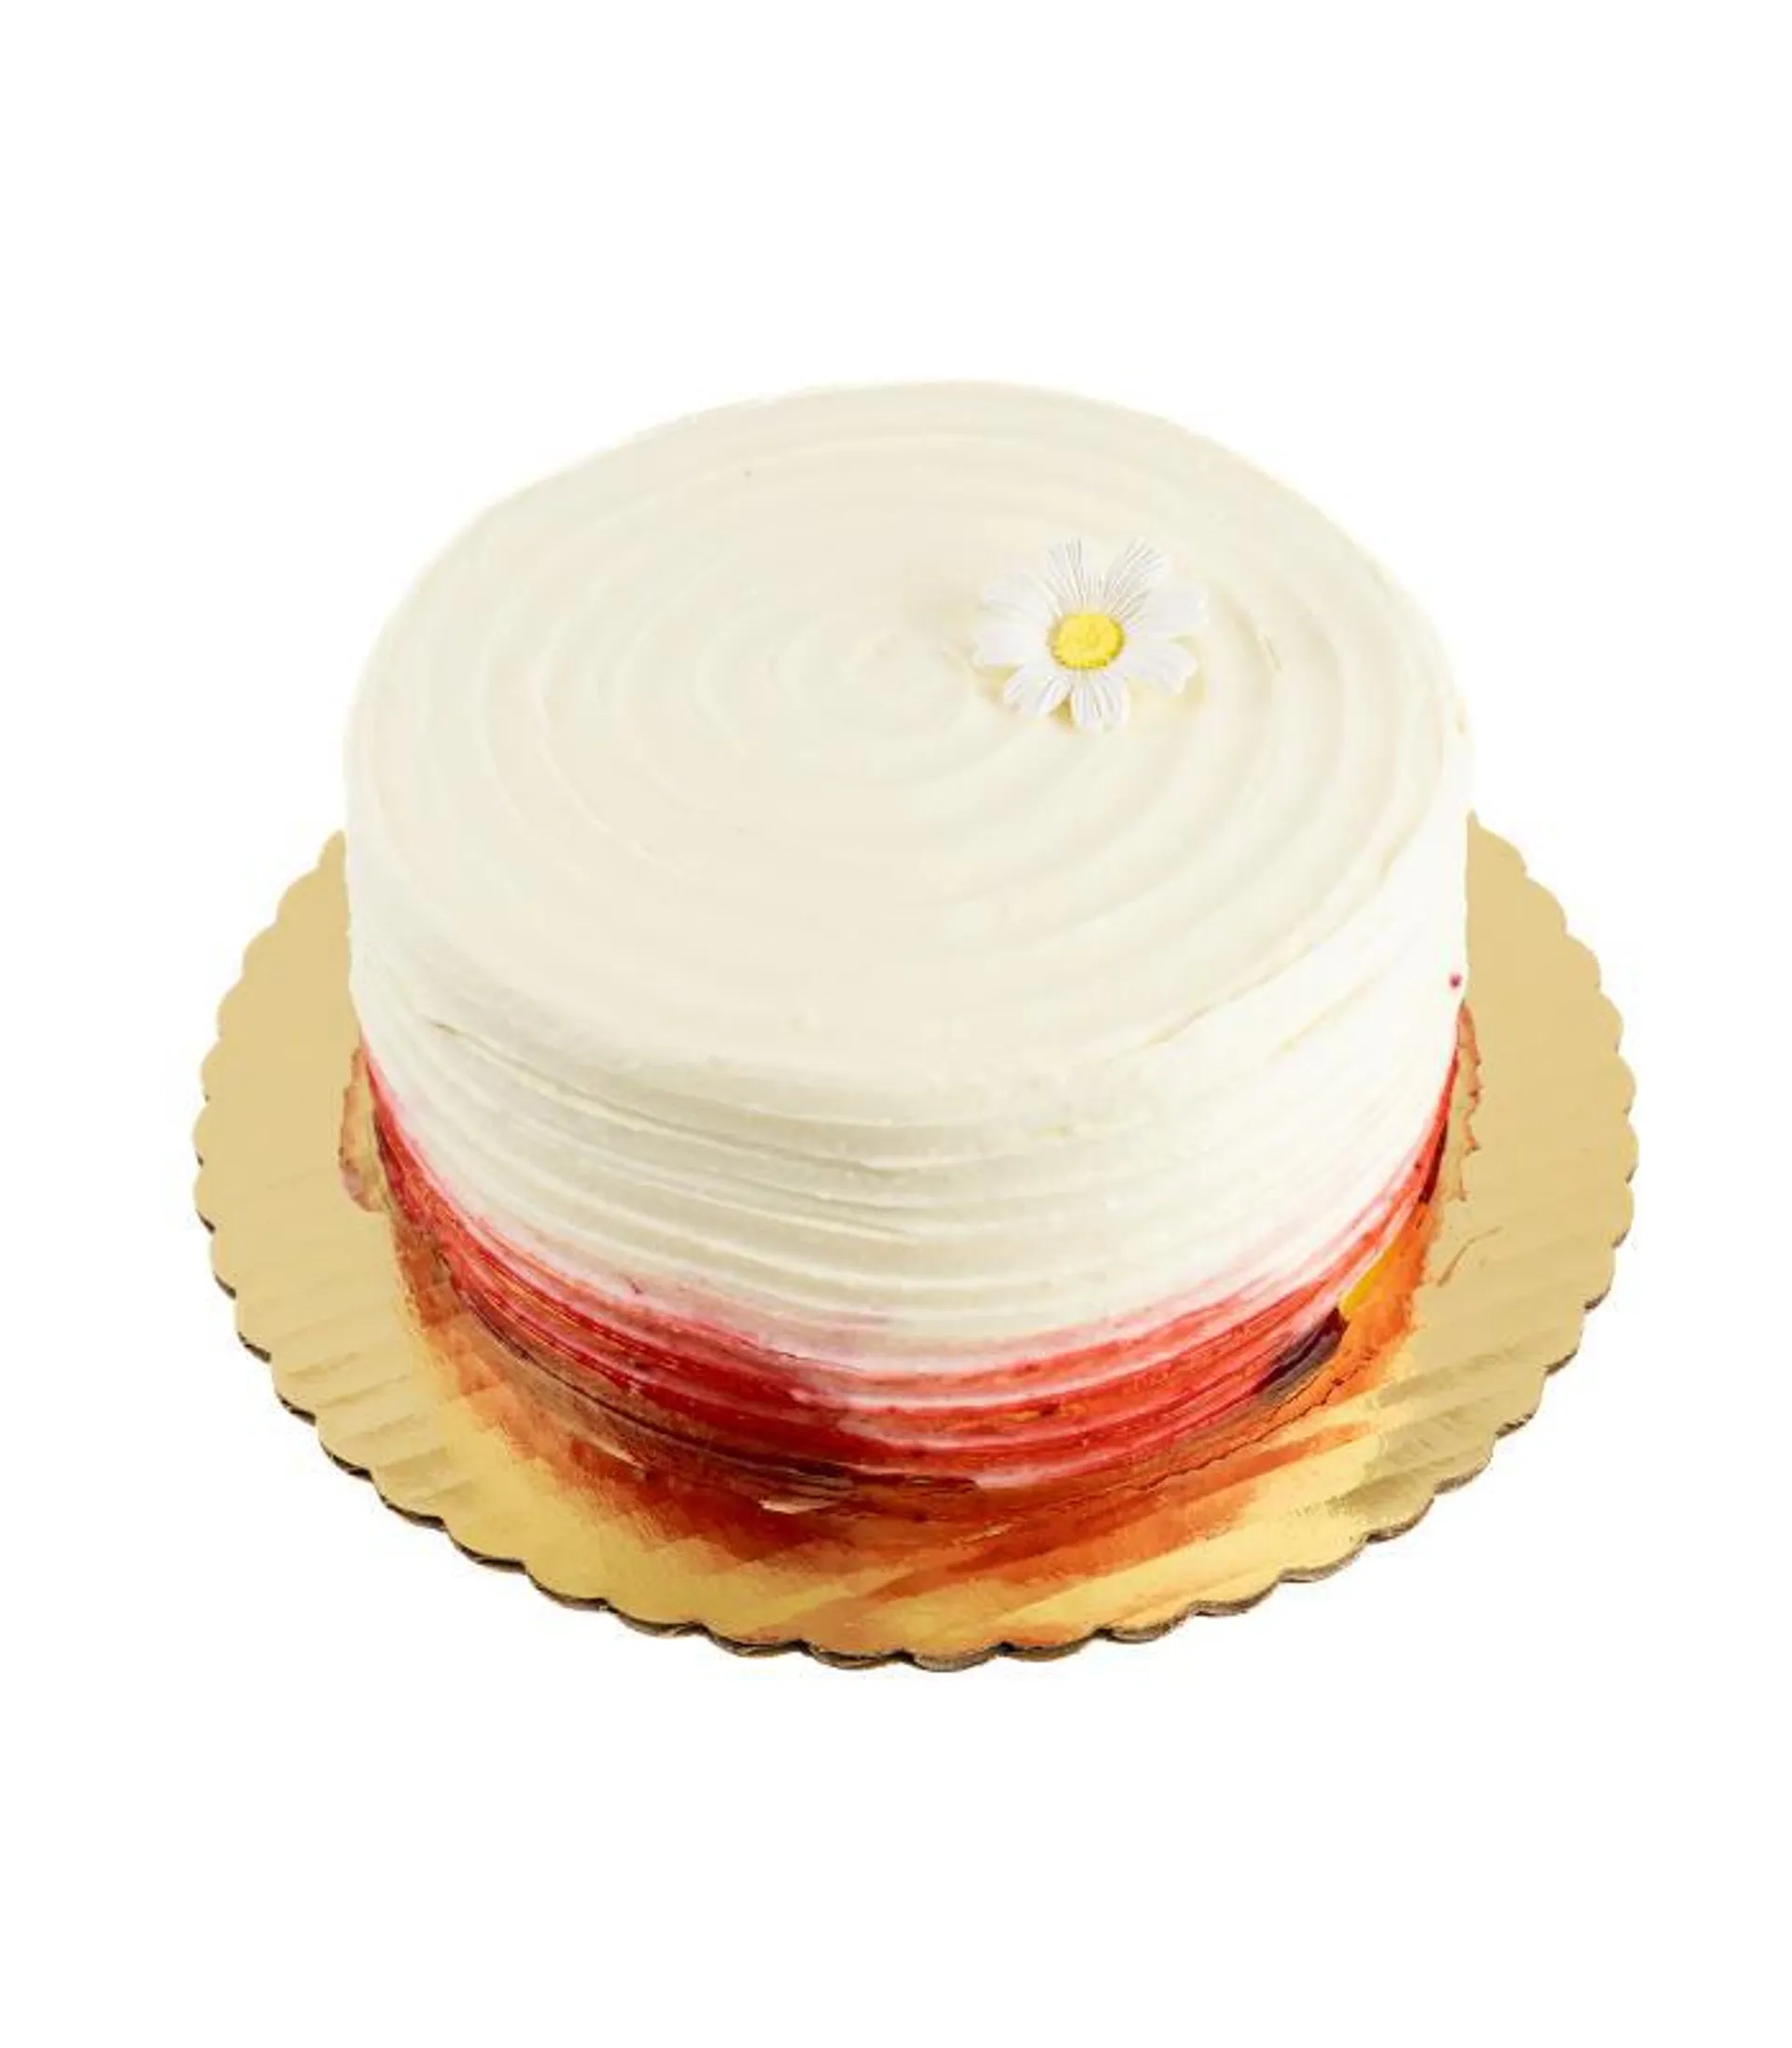 Raspberry-Filled Champagne Cake - 7” Double Layer (Serves 8-12)